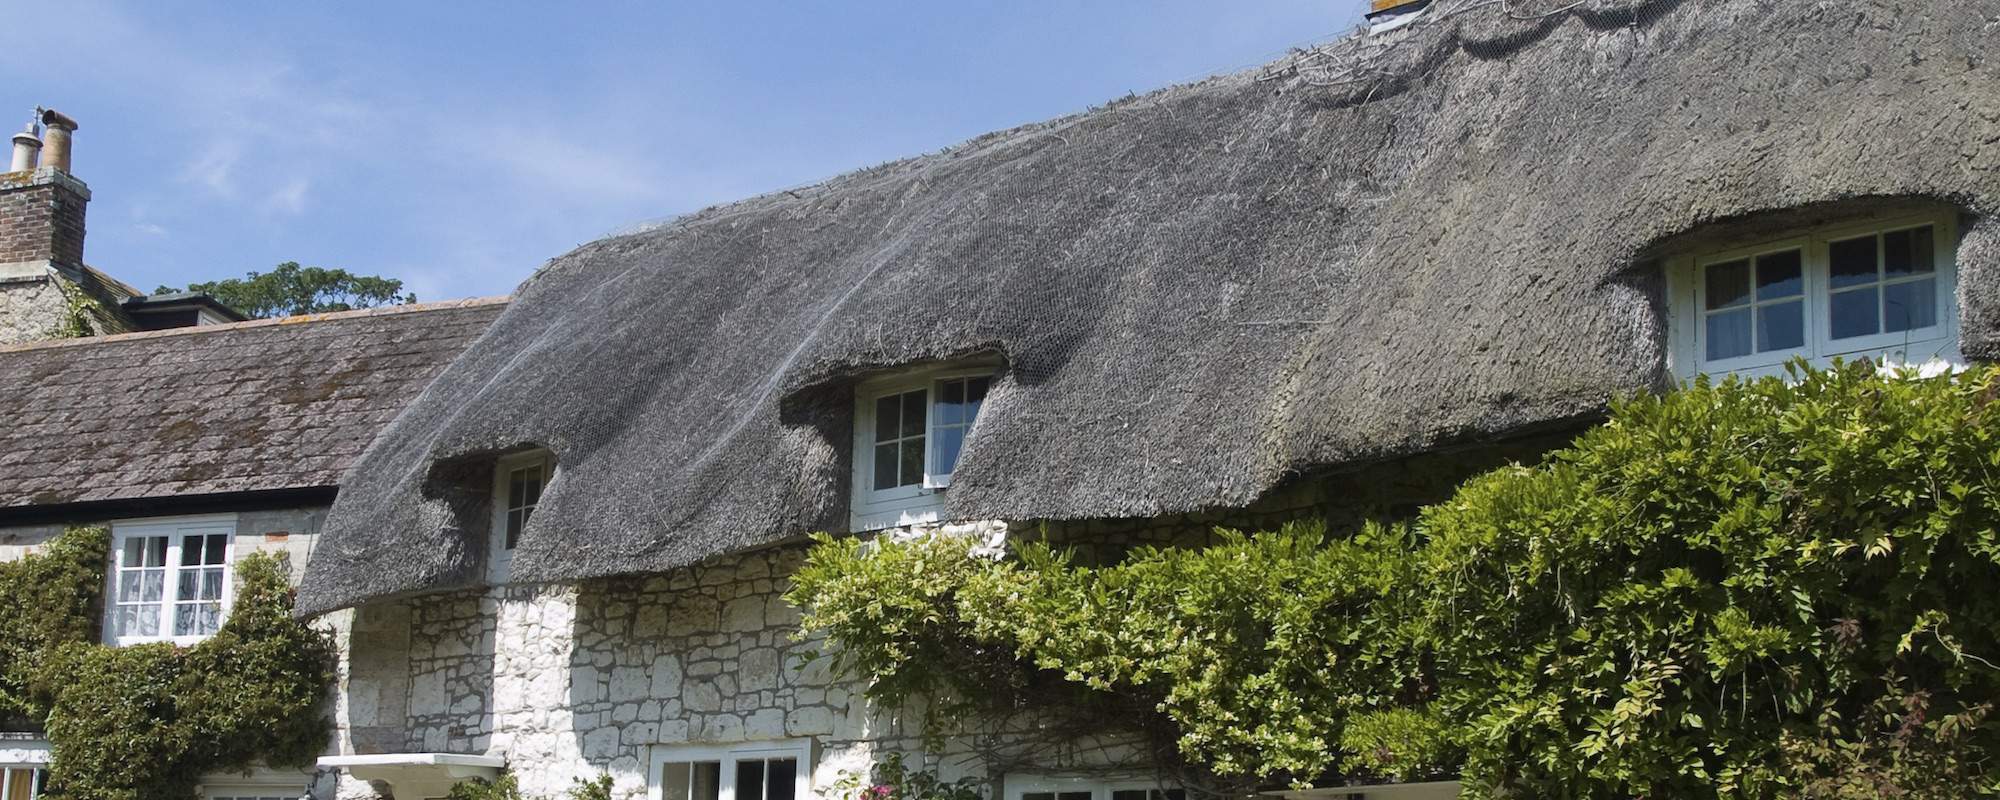 Thatched cottage roof